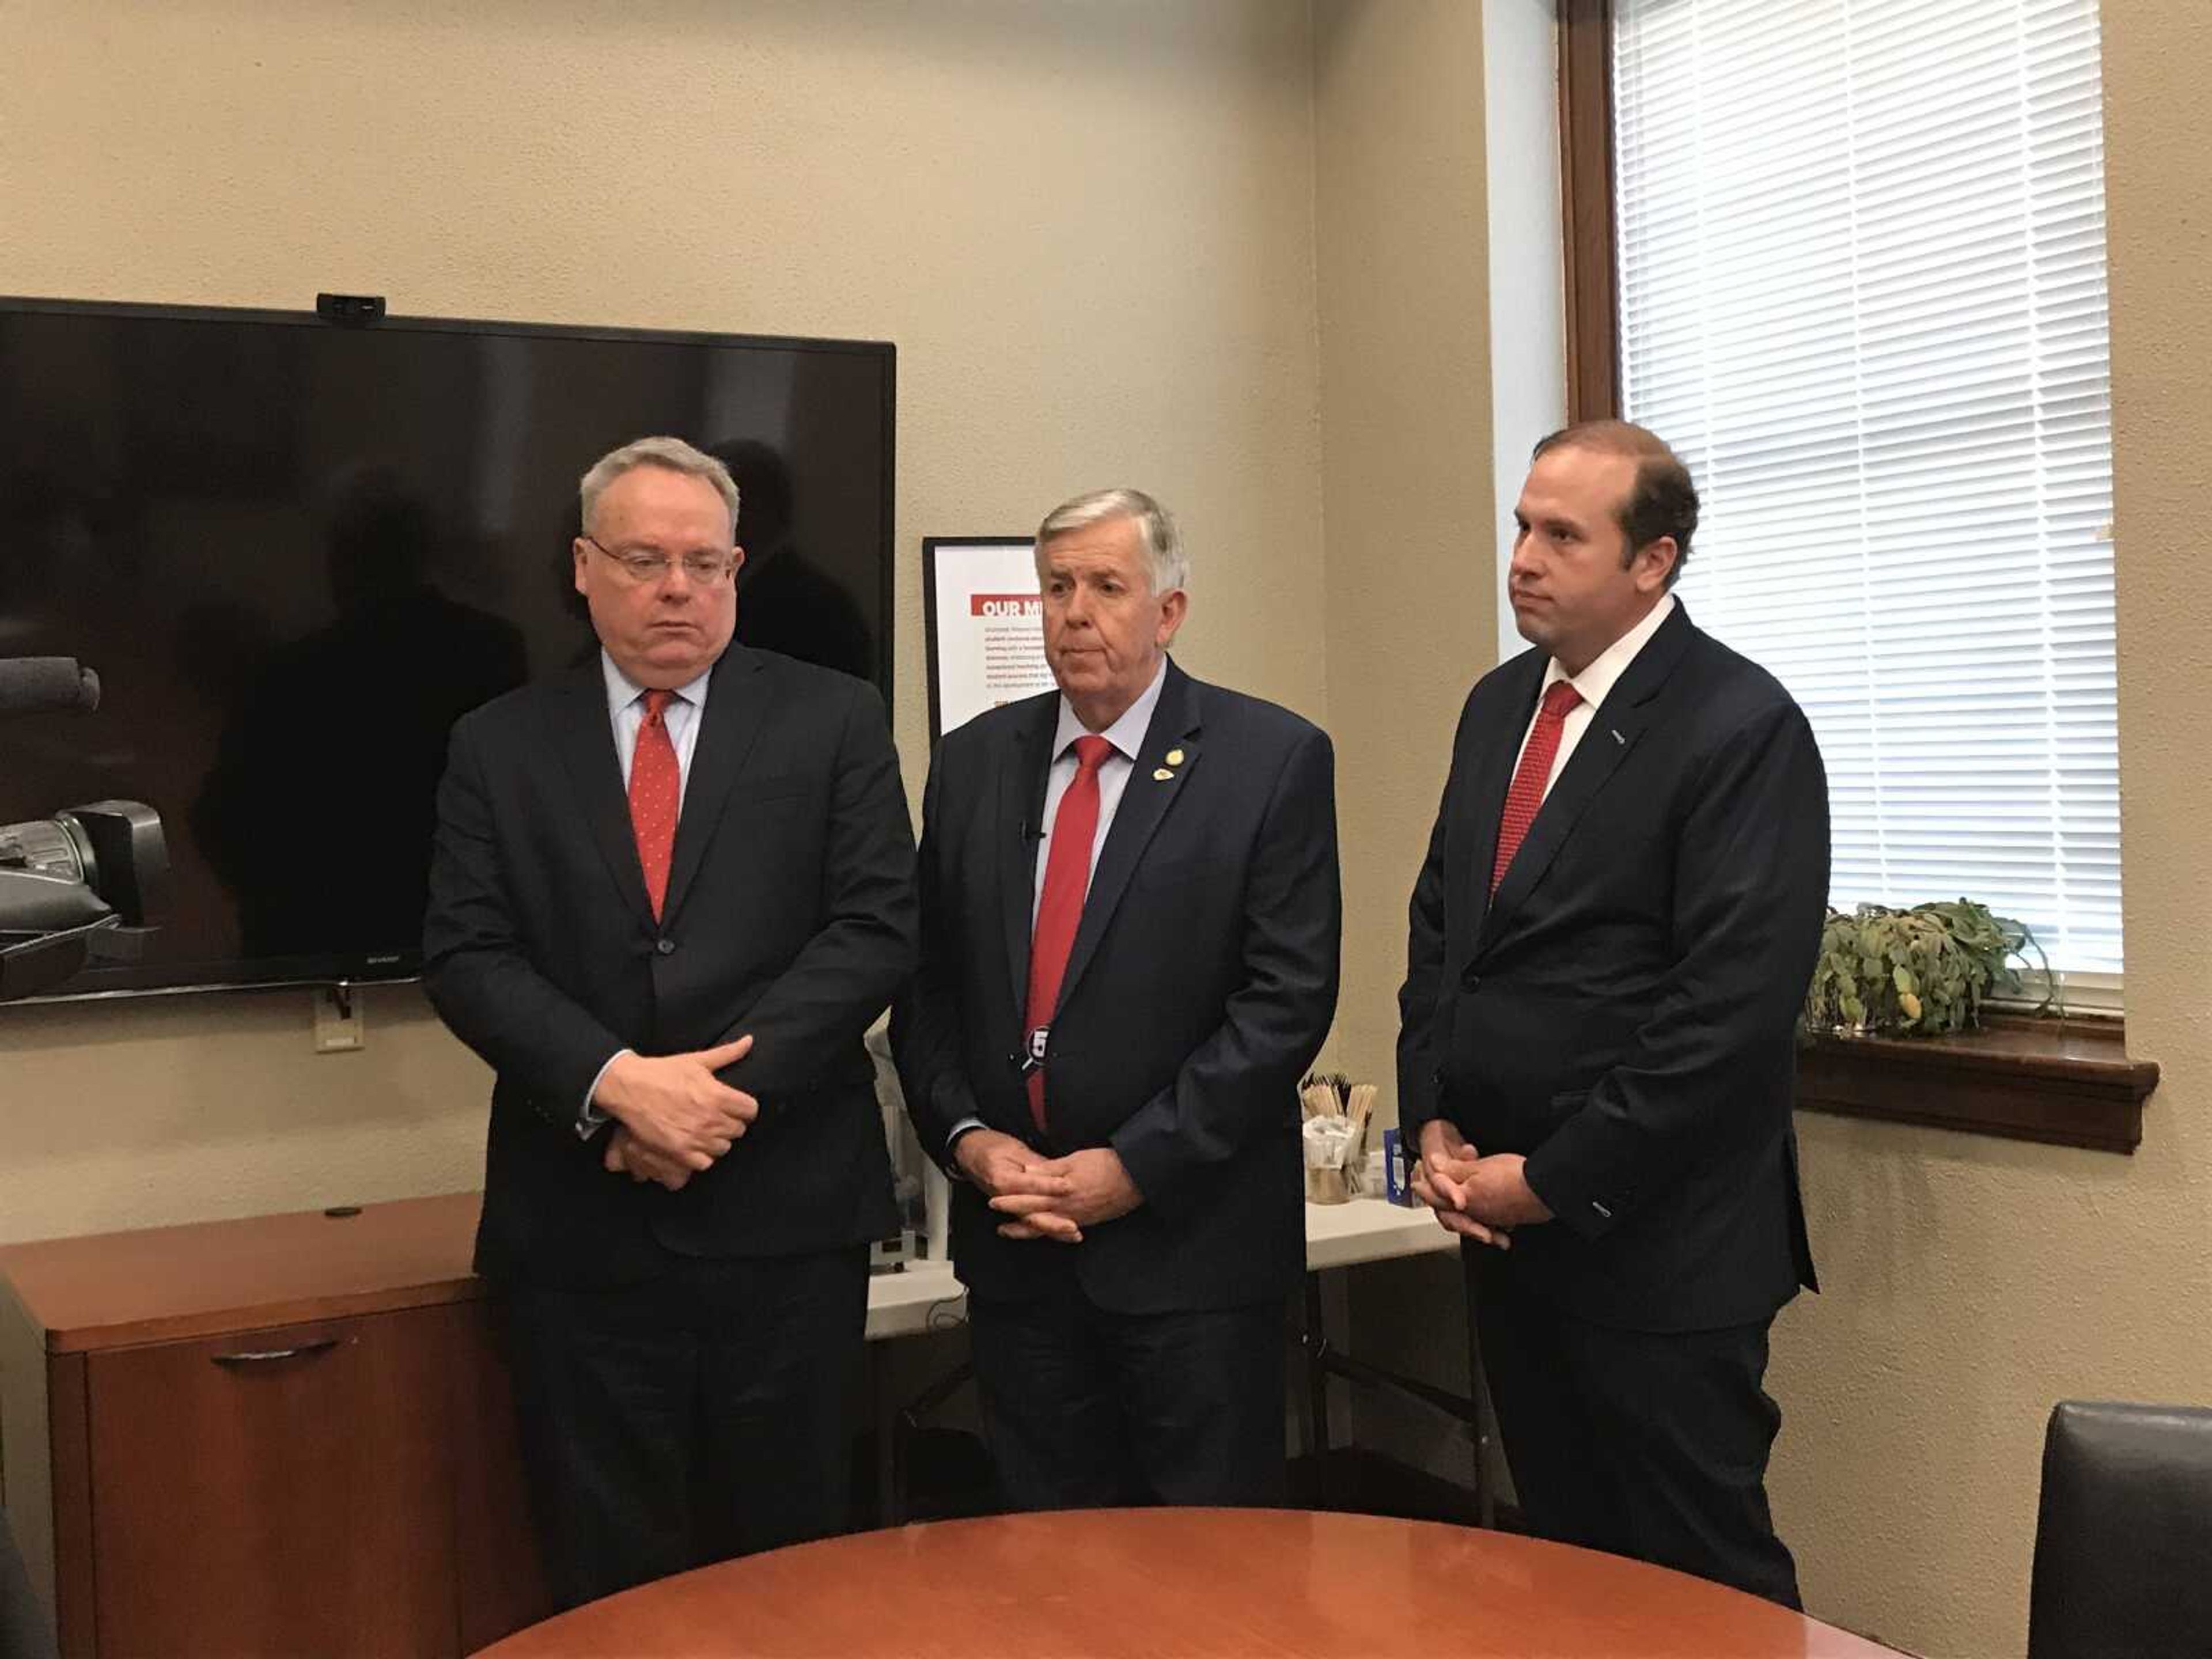 From left: White House Director of the Office of National Drug Control Policy Jim Carroll, Governor Mike Parson and U.S. Congressman Jason Smith hold a press conference following the Healthcare Roundtable at the Wehking Alumni Center on Southeast's campus on Wednesday, Feb. 19.